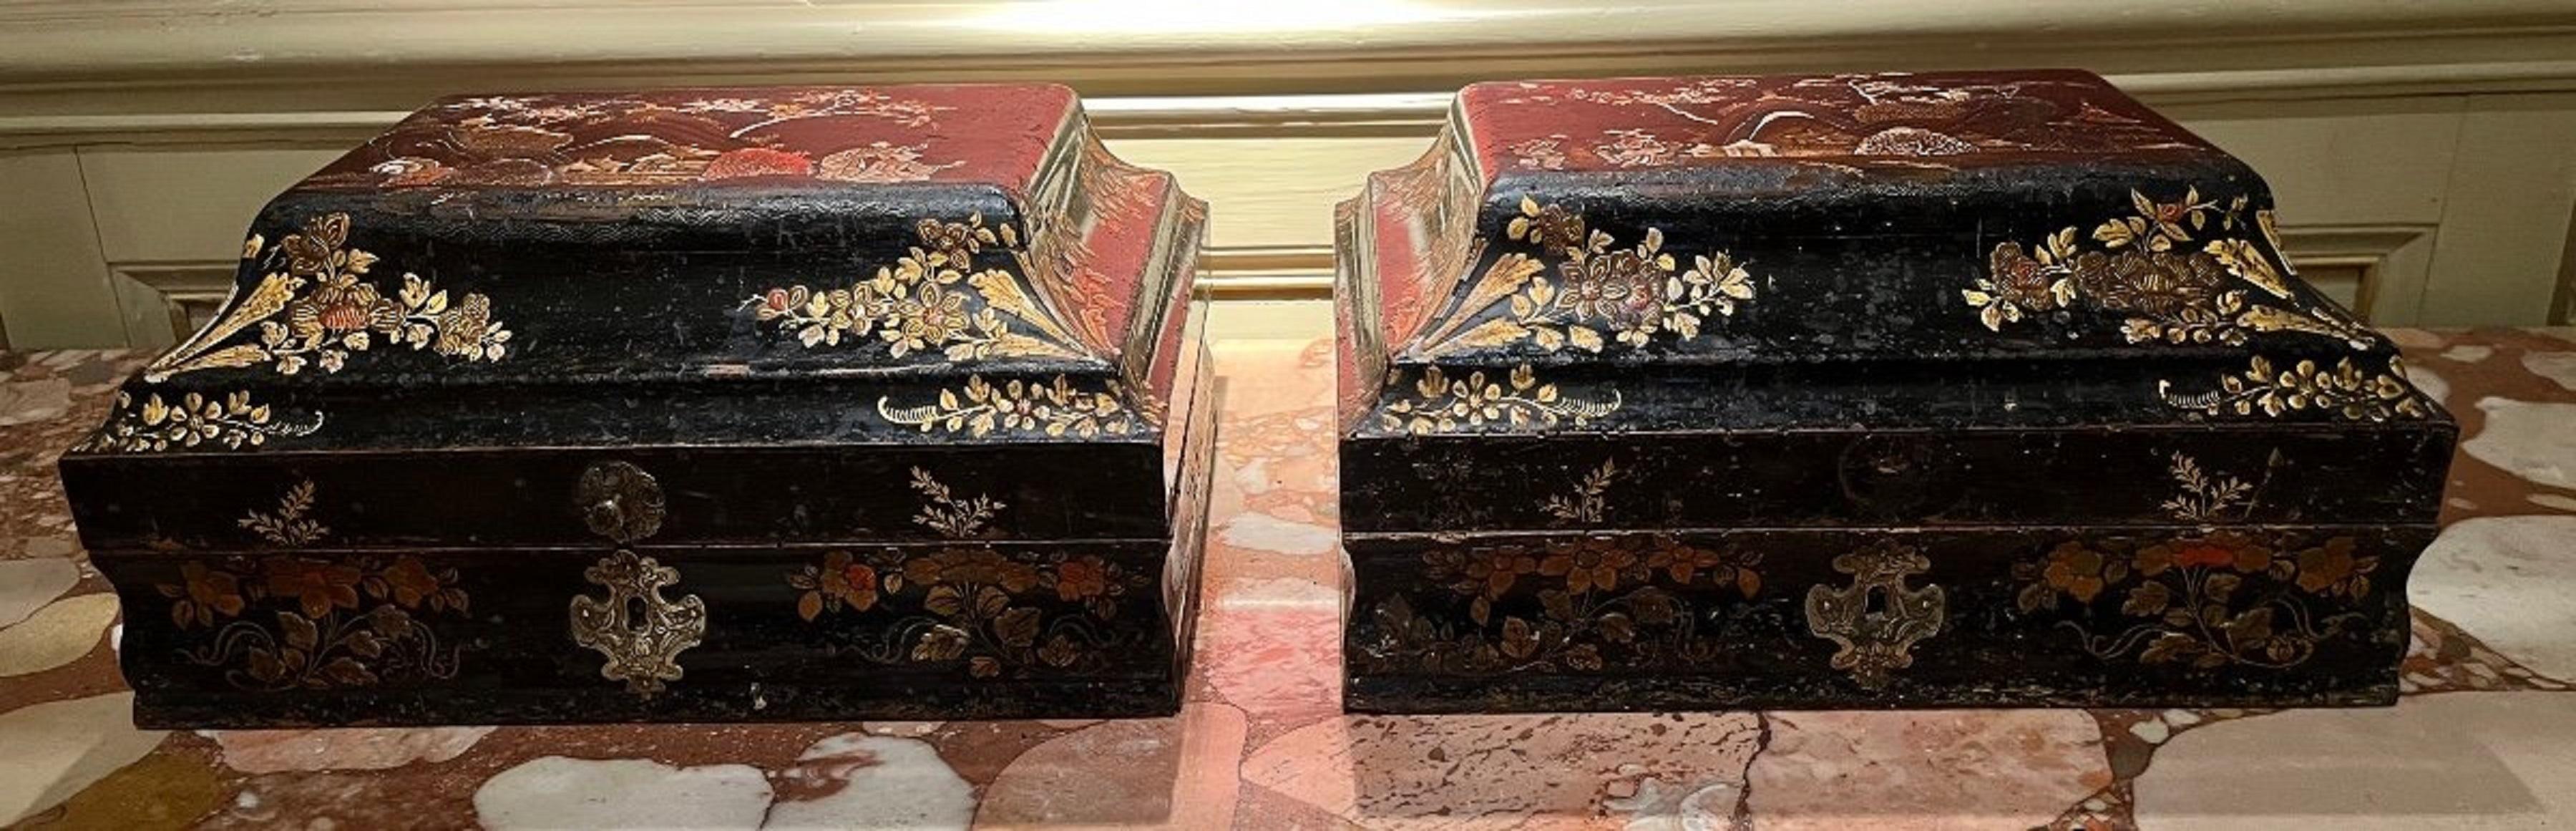 Rare pair of wig boxes.
Regency period.
Decoration (in symmetry on both) of chinoiseries on a black lacquered background (Vernis Martin).
Very elegant shape, reversed cove lid.
the traditionally red interior.
The hinges and keyholes as always